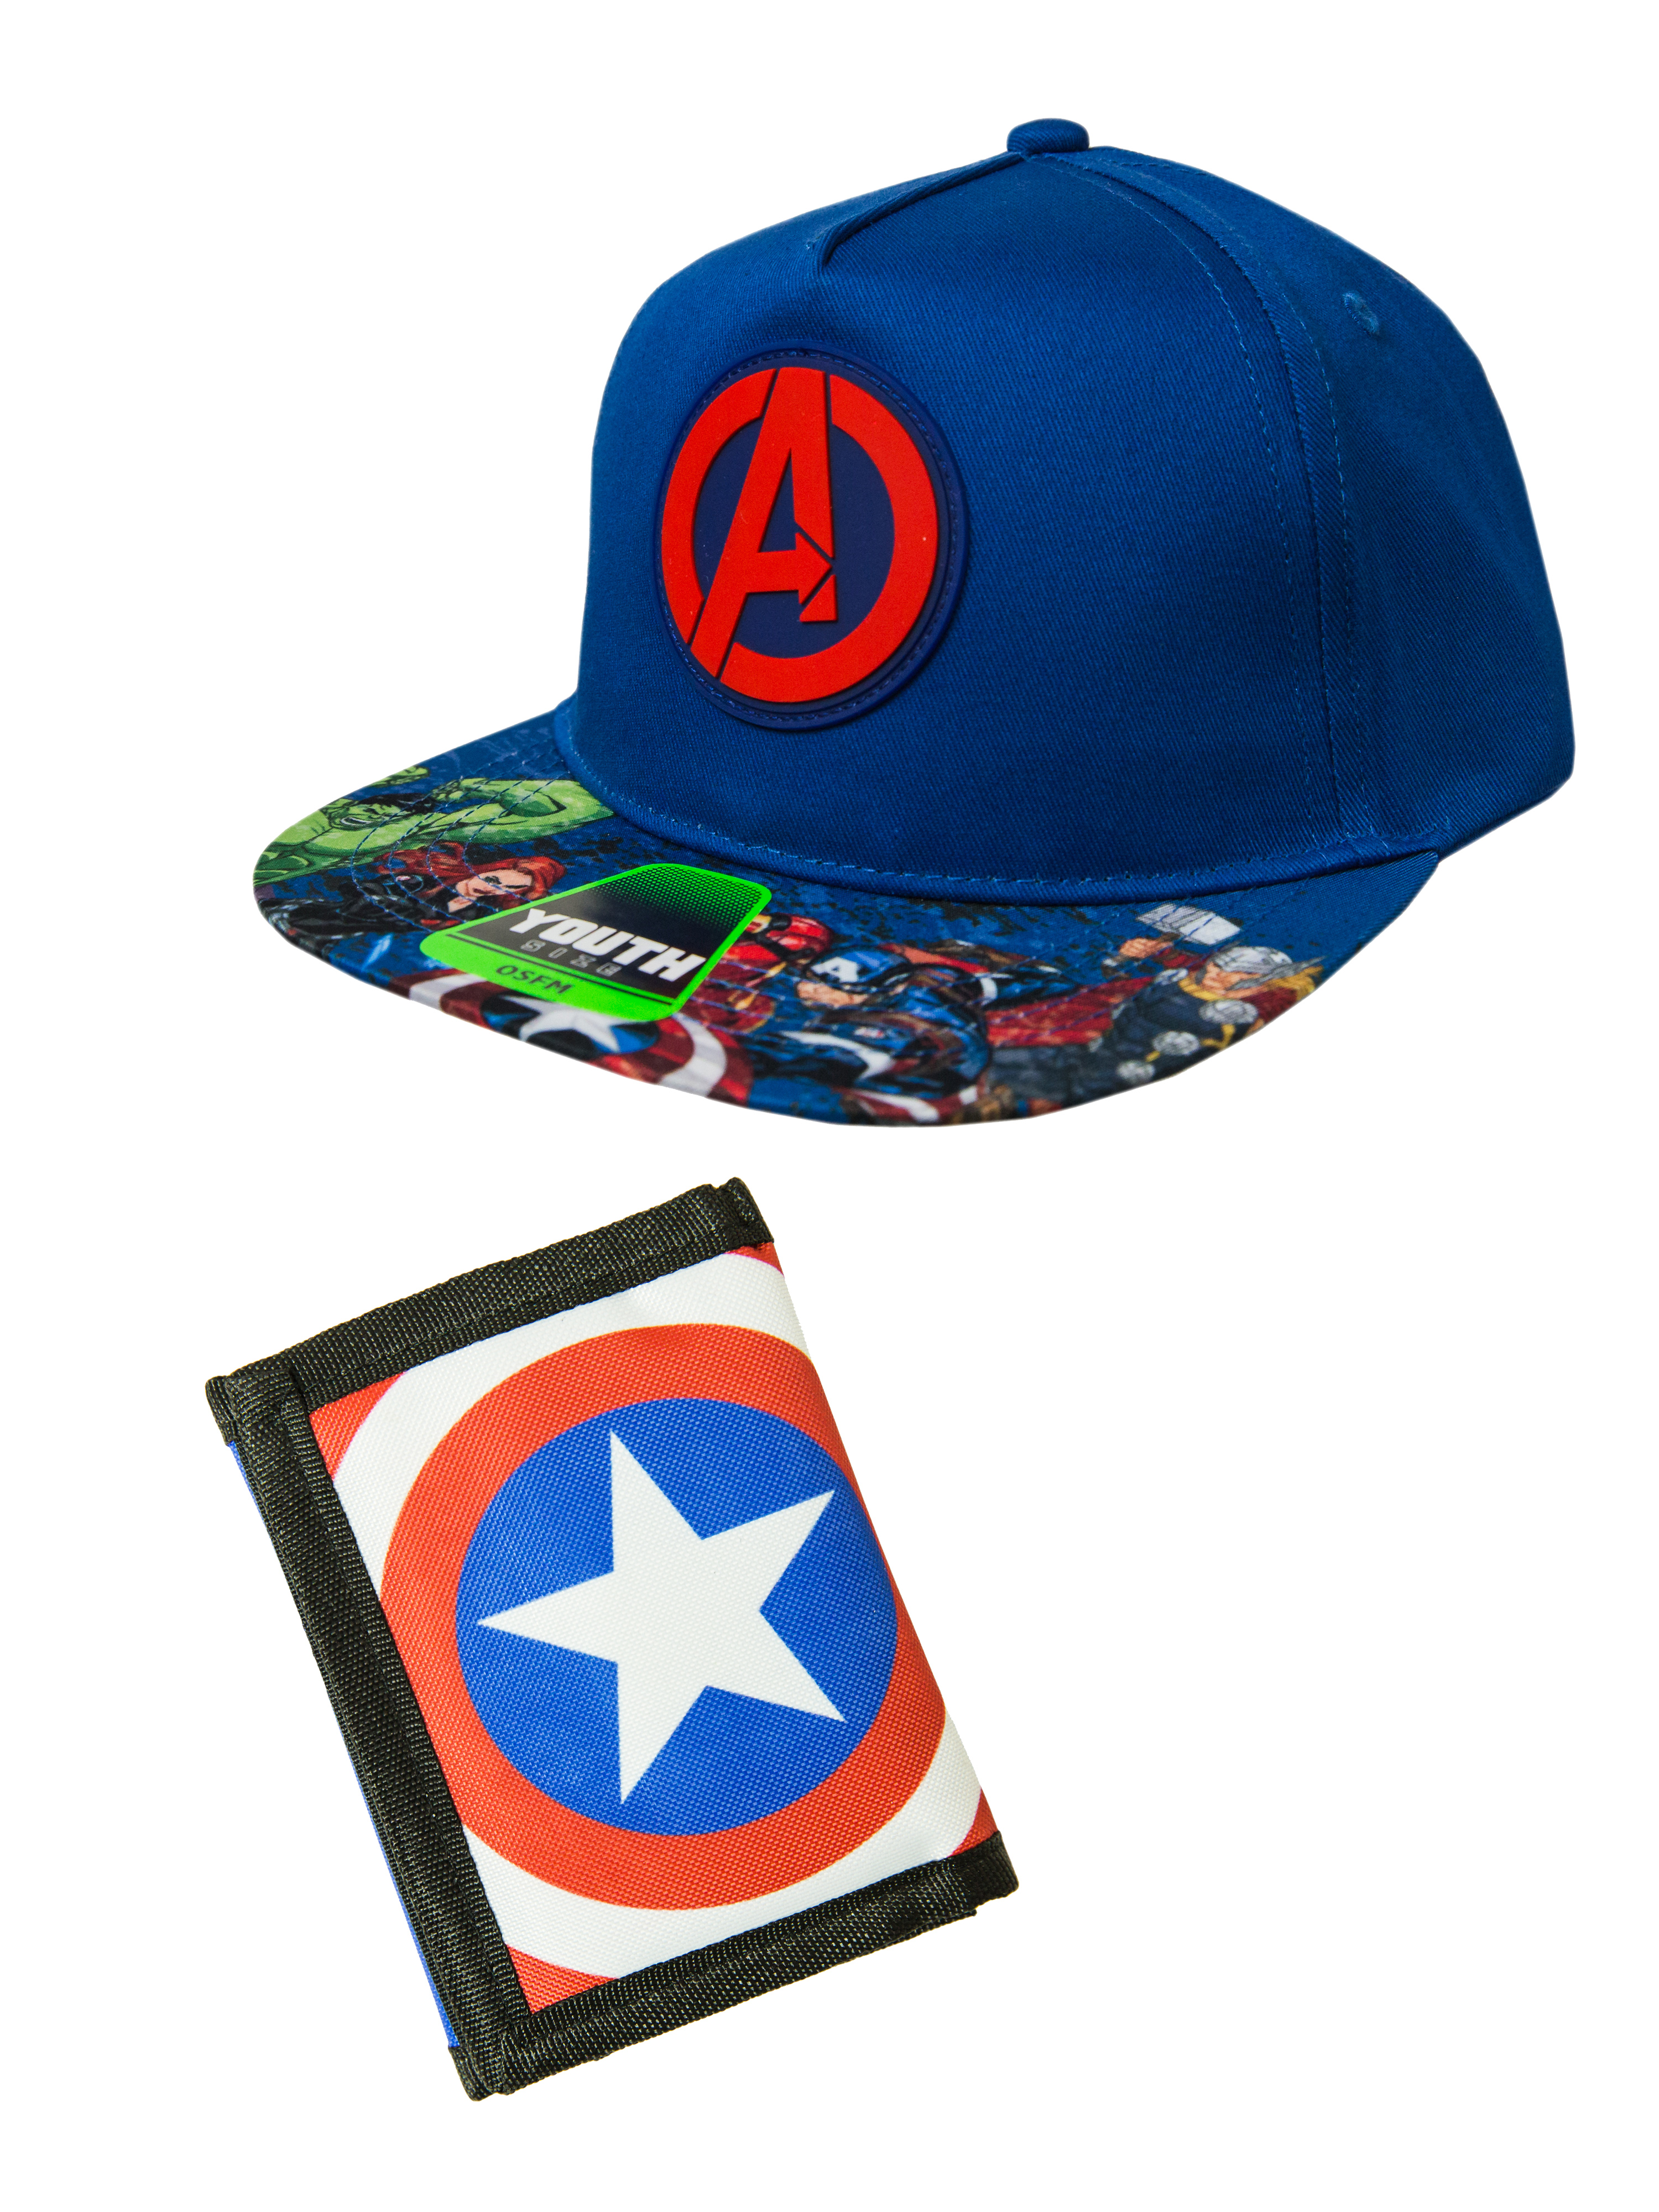 Marvel Avengers Boys Baseball Hat And Tri-Fold Wallet Combo, Youth Size - image 1 of 6